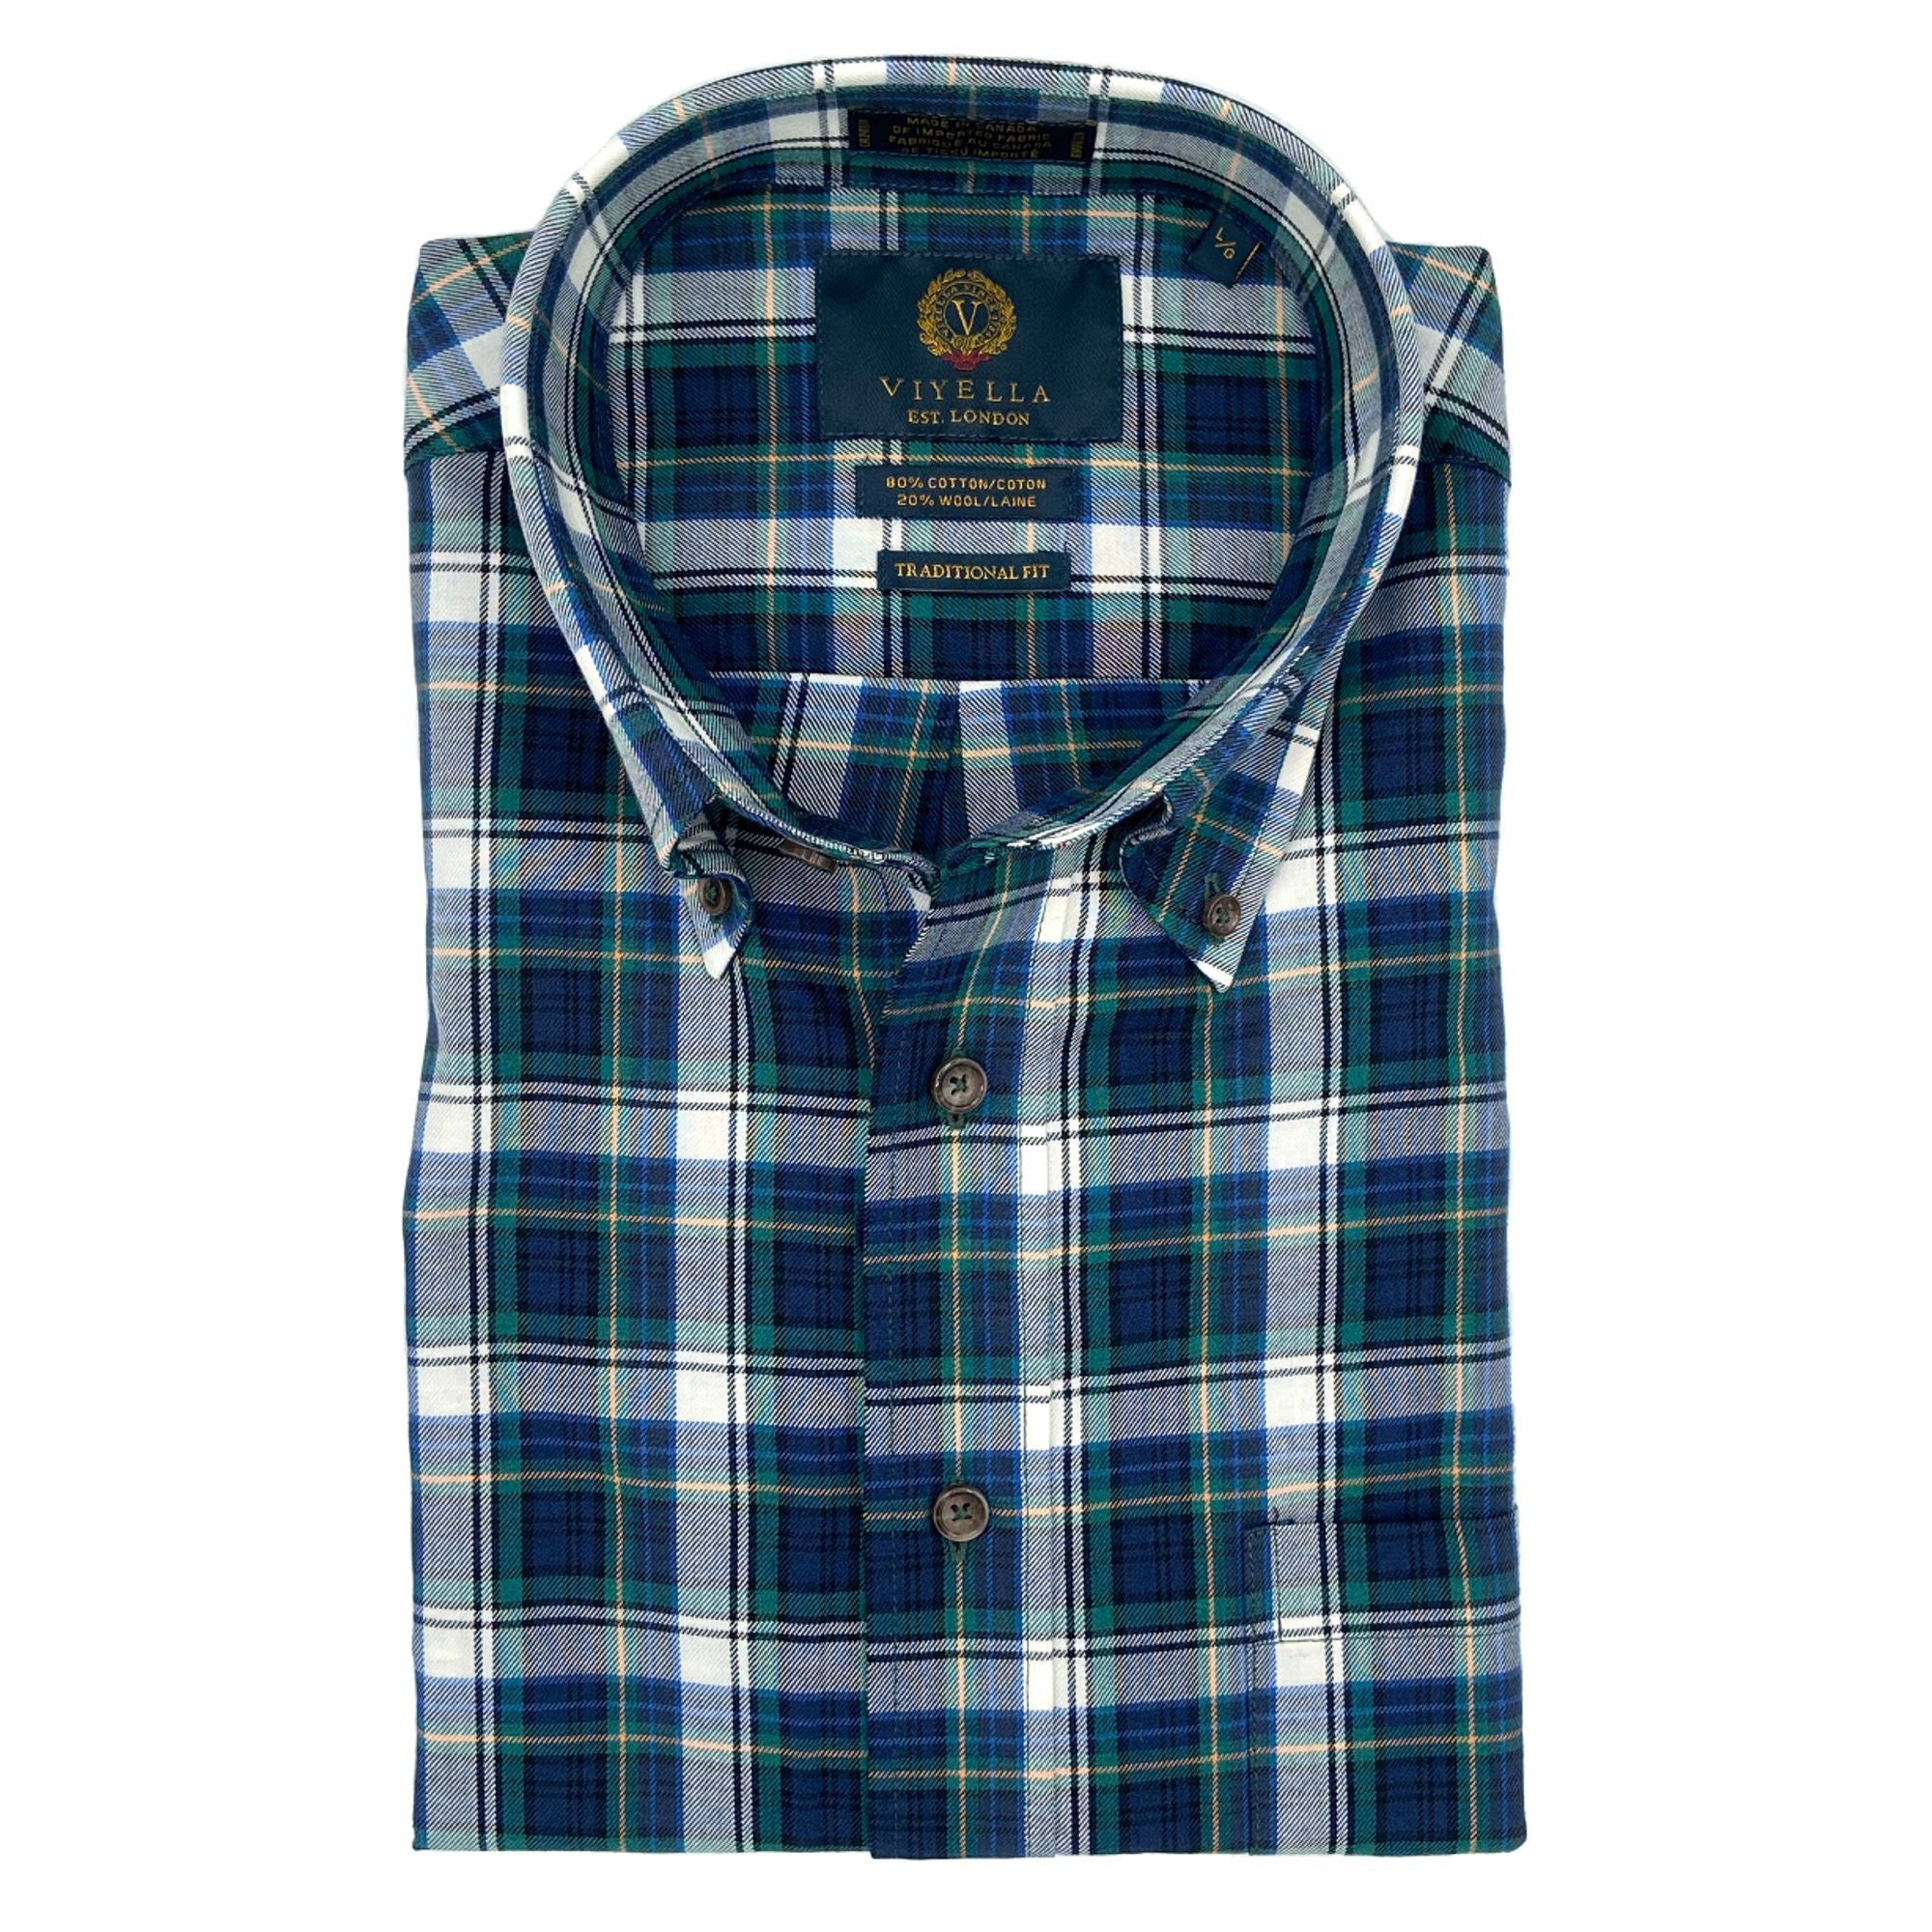 Forest, Blue and Winter White Plaid Cotton and Wool Blend Button-Down Shirt by Viyella